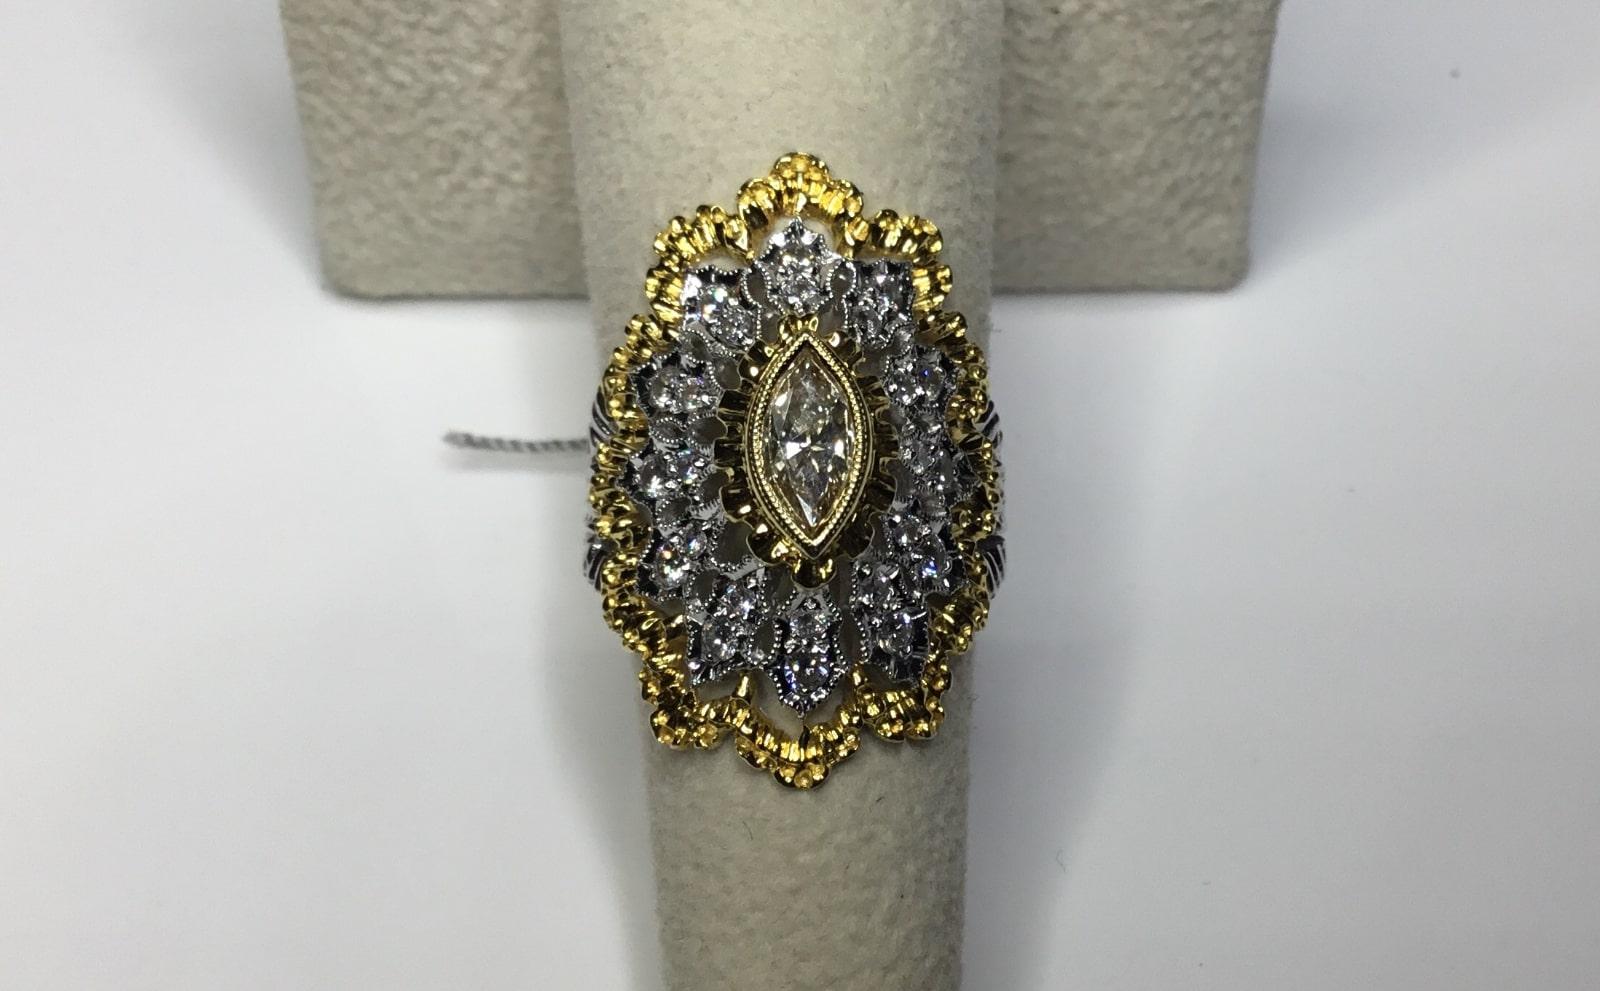 Estate 18 Karat White and Yellow Gold 1.5 Carat Diamond Ring 7.5 Grams In Excellent Condition For Sale In Houston, TX